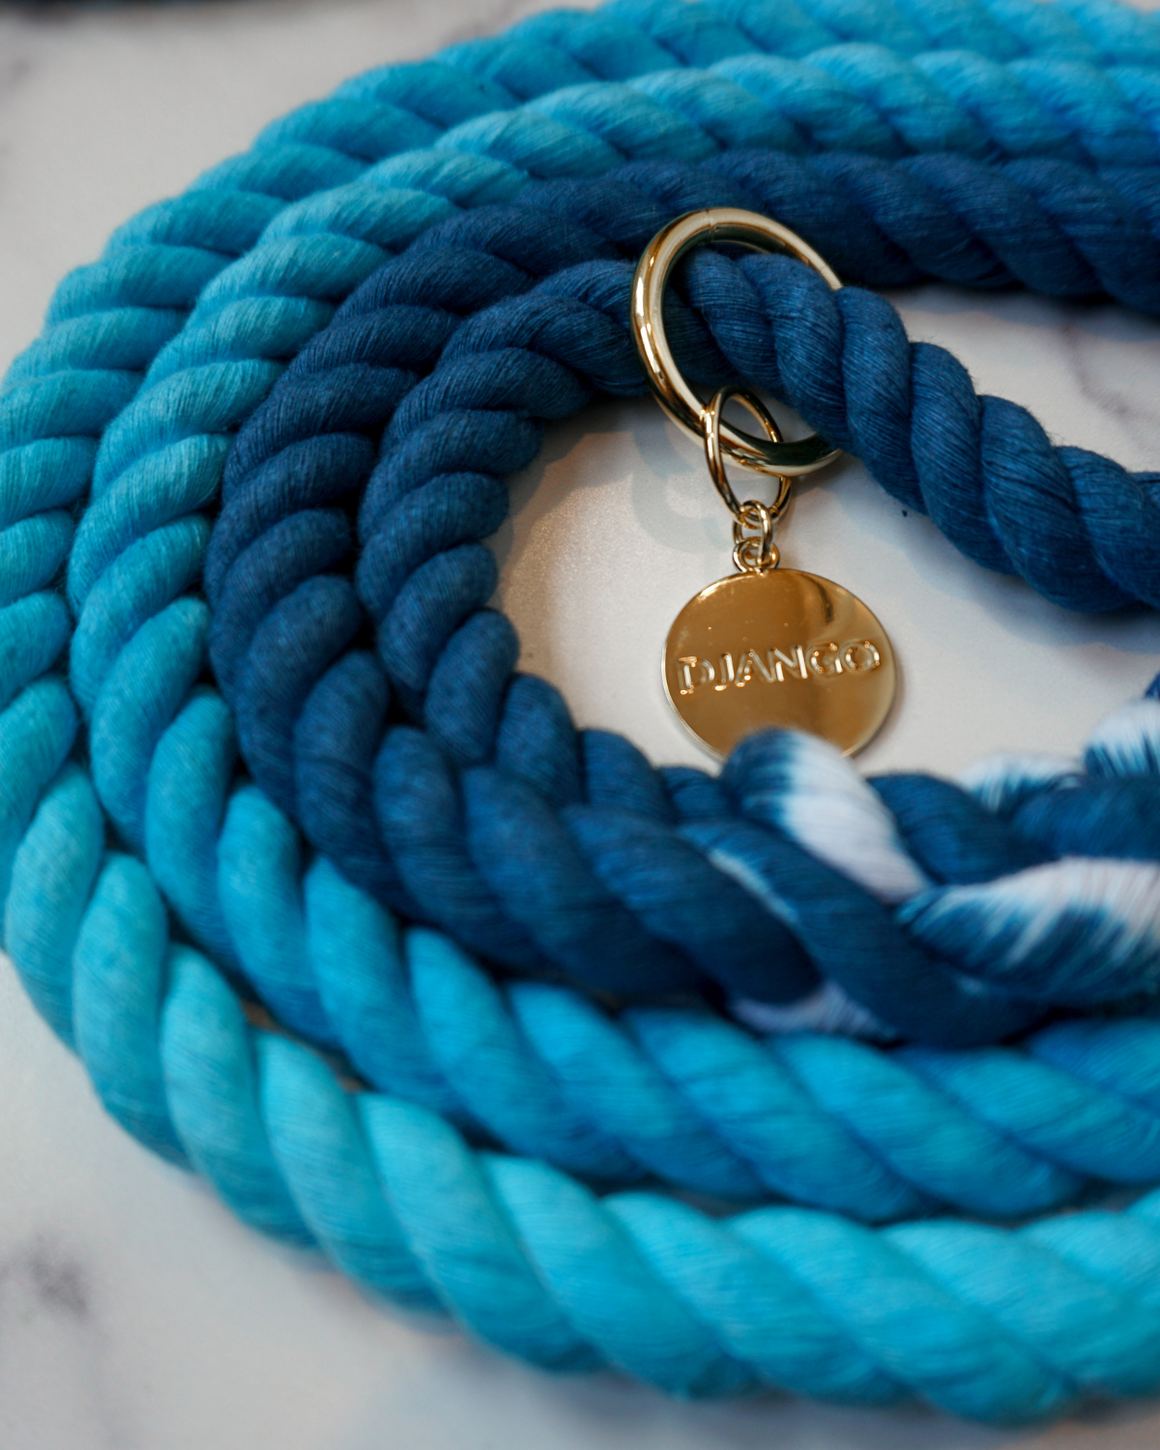 DJANGO Pacific Blue Cotton Rope Dog Leash - You and your dog will be the most stylish ones on the sidewalk with this handcrafted and hand-dyed green ombré cotton rope leash. Crafted from soft and flexible three-strand natural cotton rope, the rope leashes are hand-spliced and the ends whipped, resulting in an incredibly strong yet effortlessly chic and comfortable dog lead. Gold hardware adds additional sophistication to the stylish dog lead. Leash length measures 5 feet (152 cm) - djangobrand.com